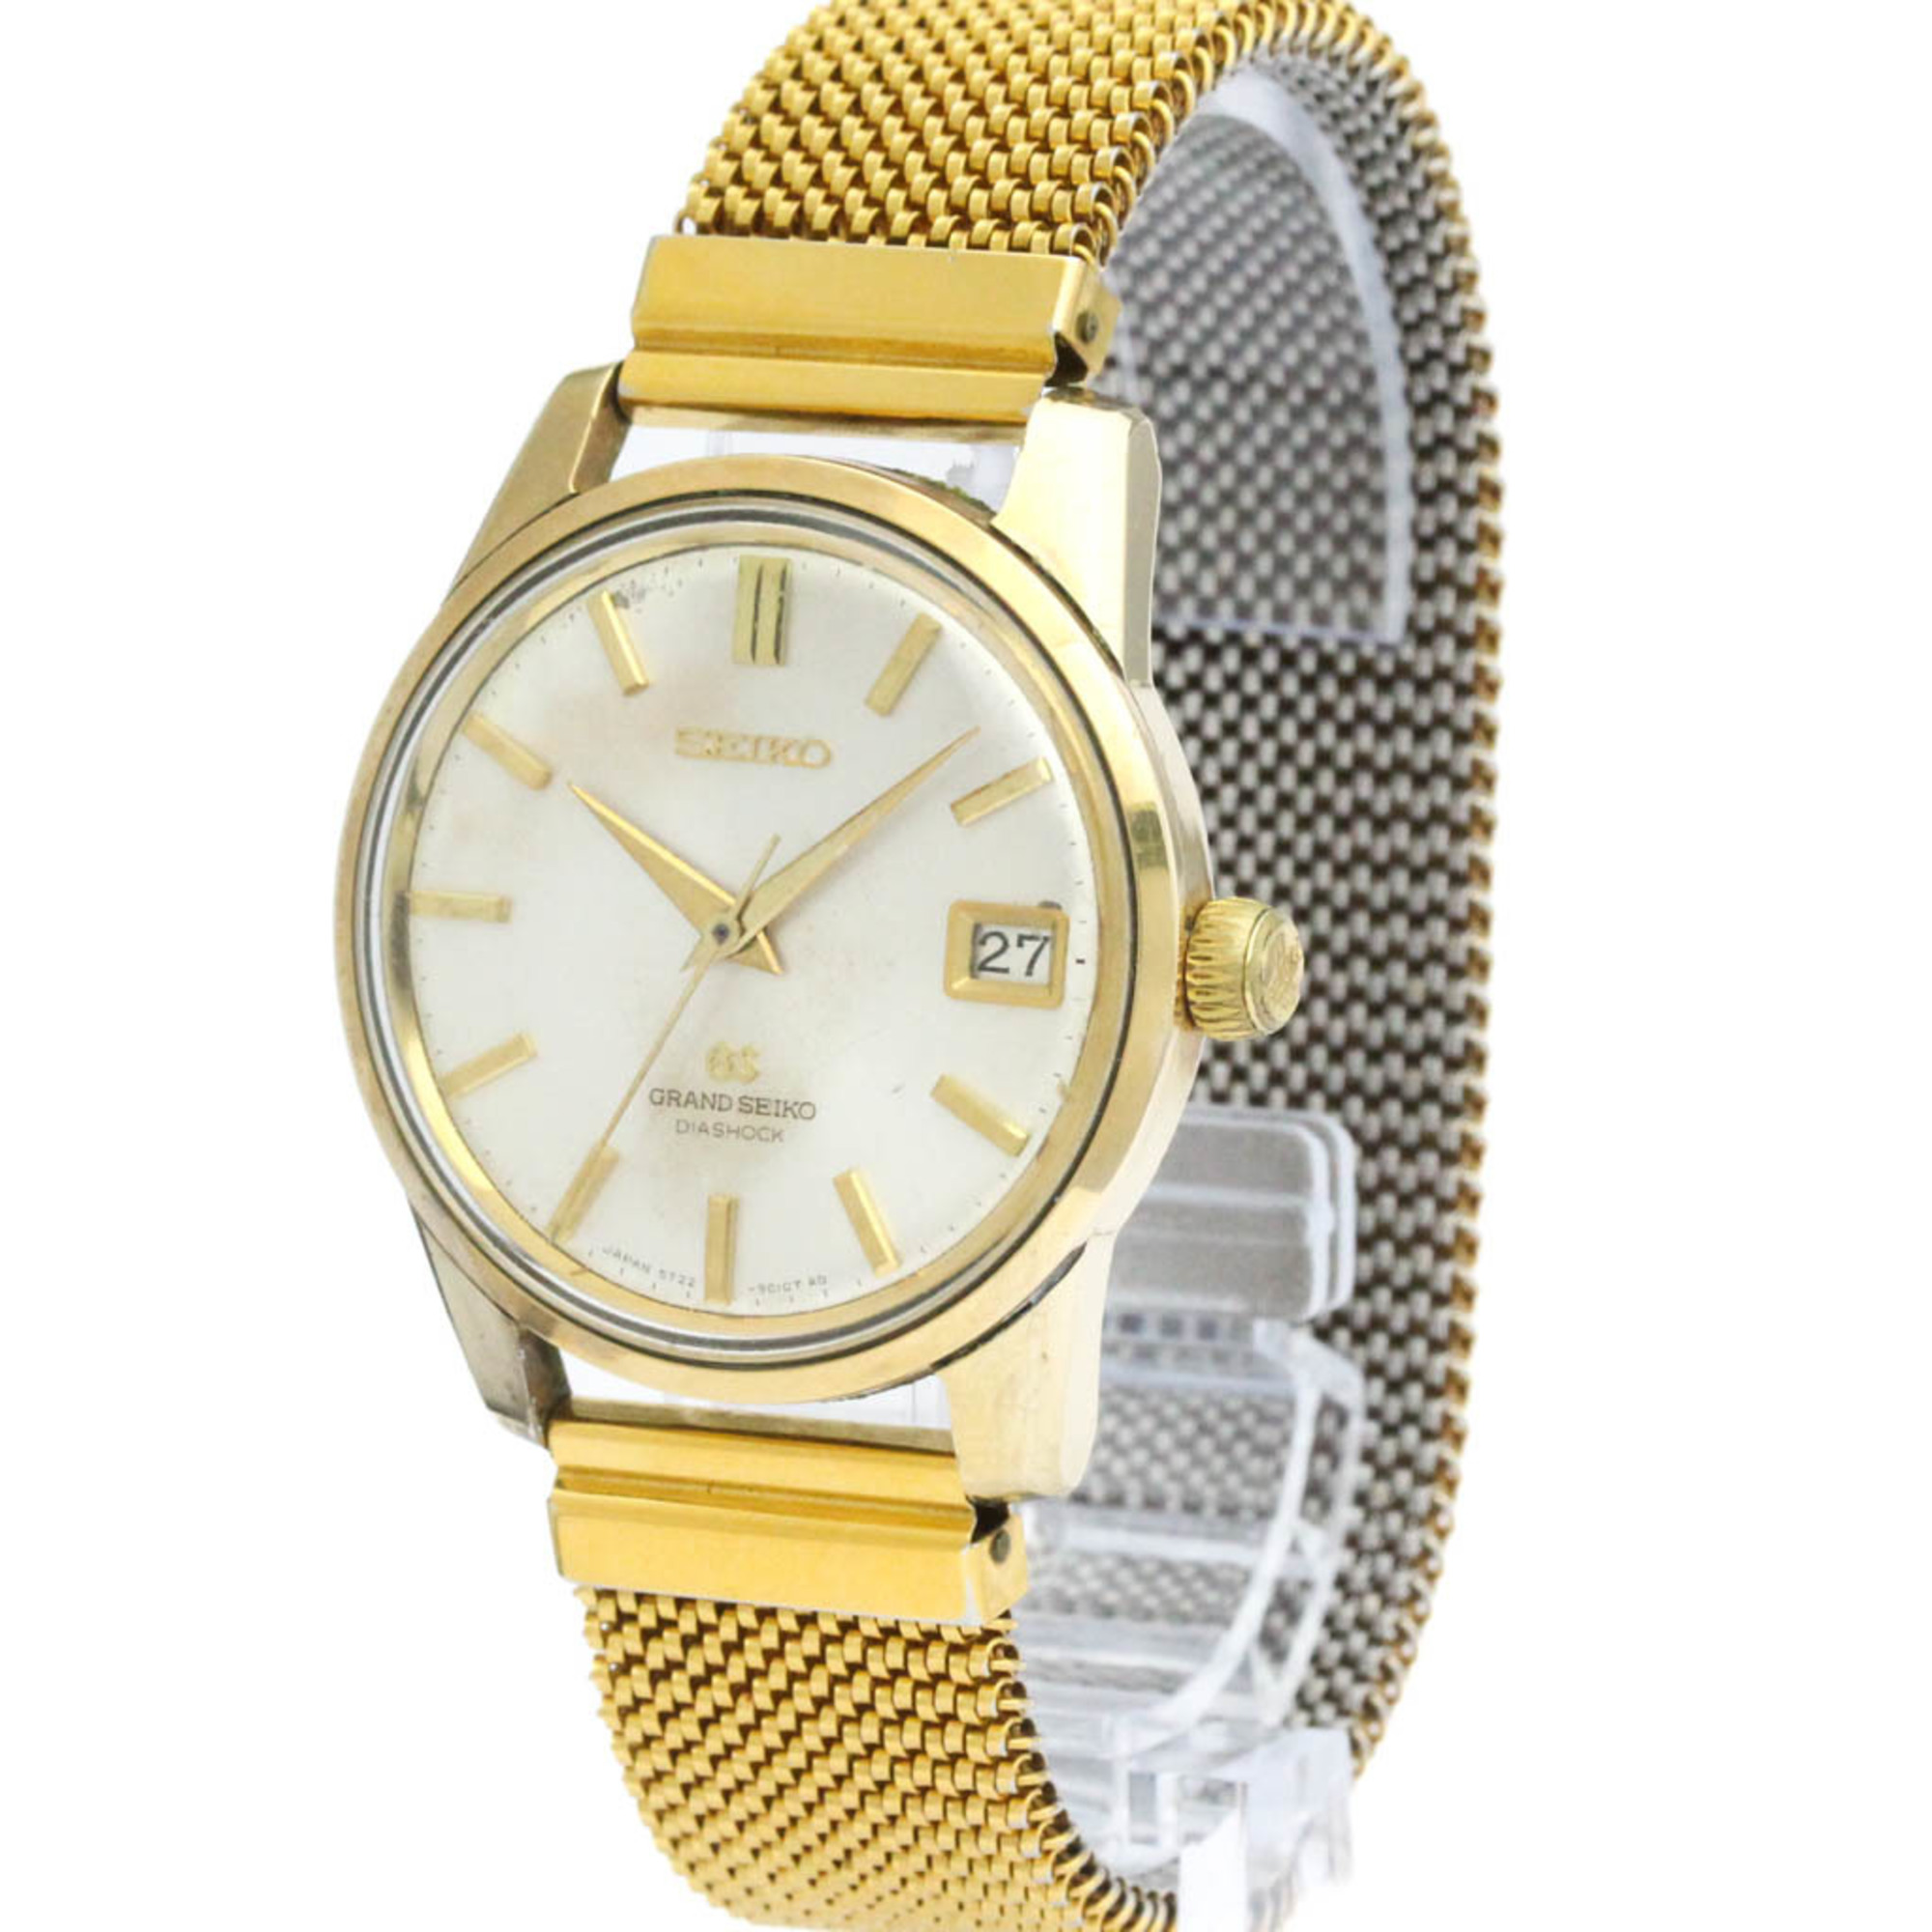 GRAND SEIKO Date Gold Plated Hand-Winding Mens Watch 5722-9011